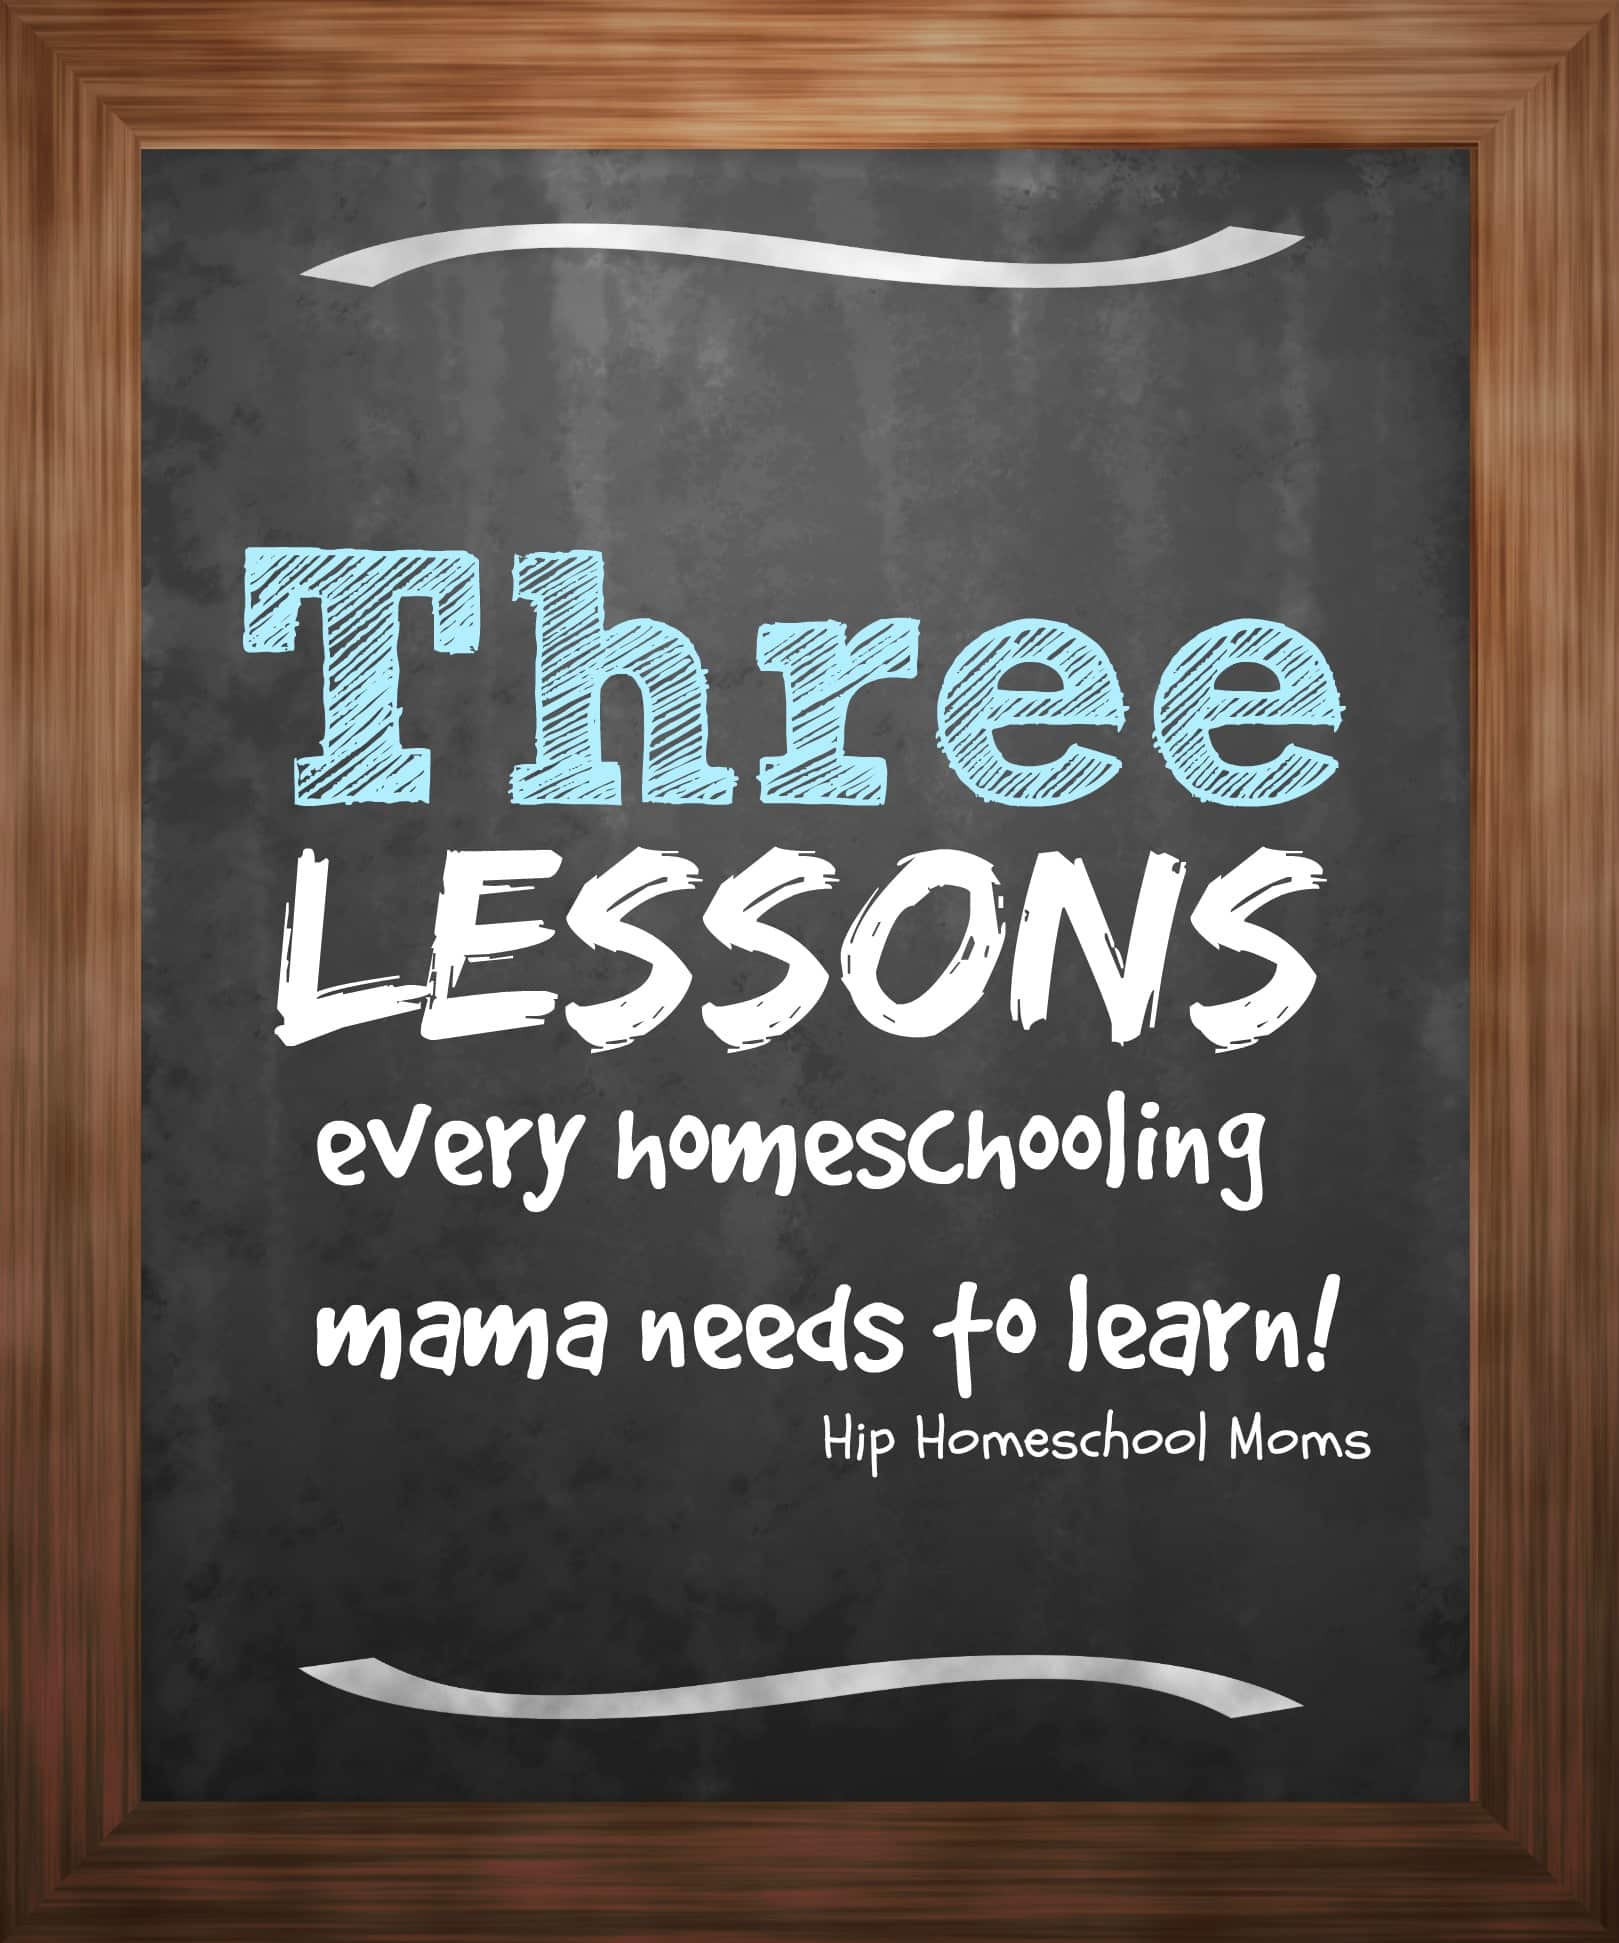 3 Lessons every homeschooling mama needs to learn